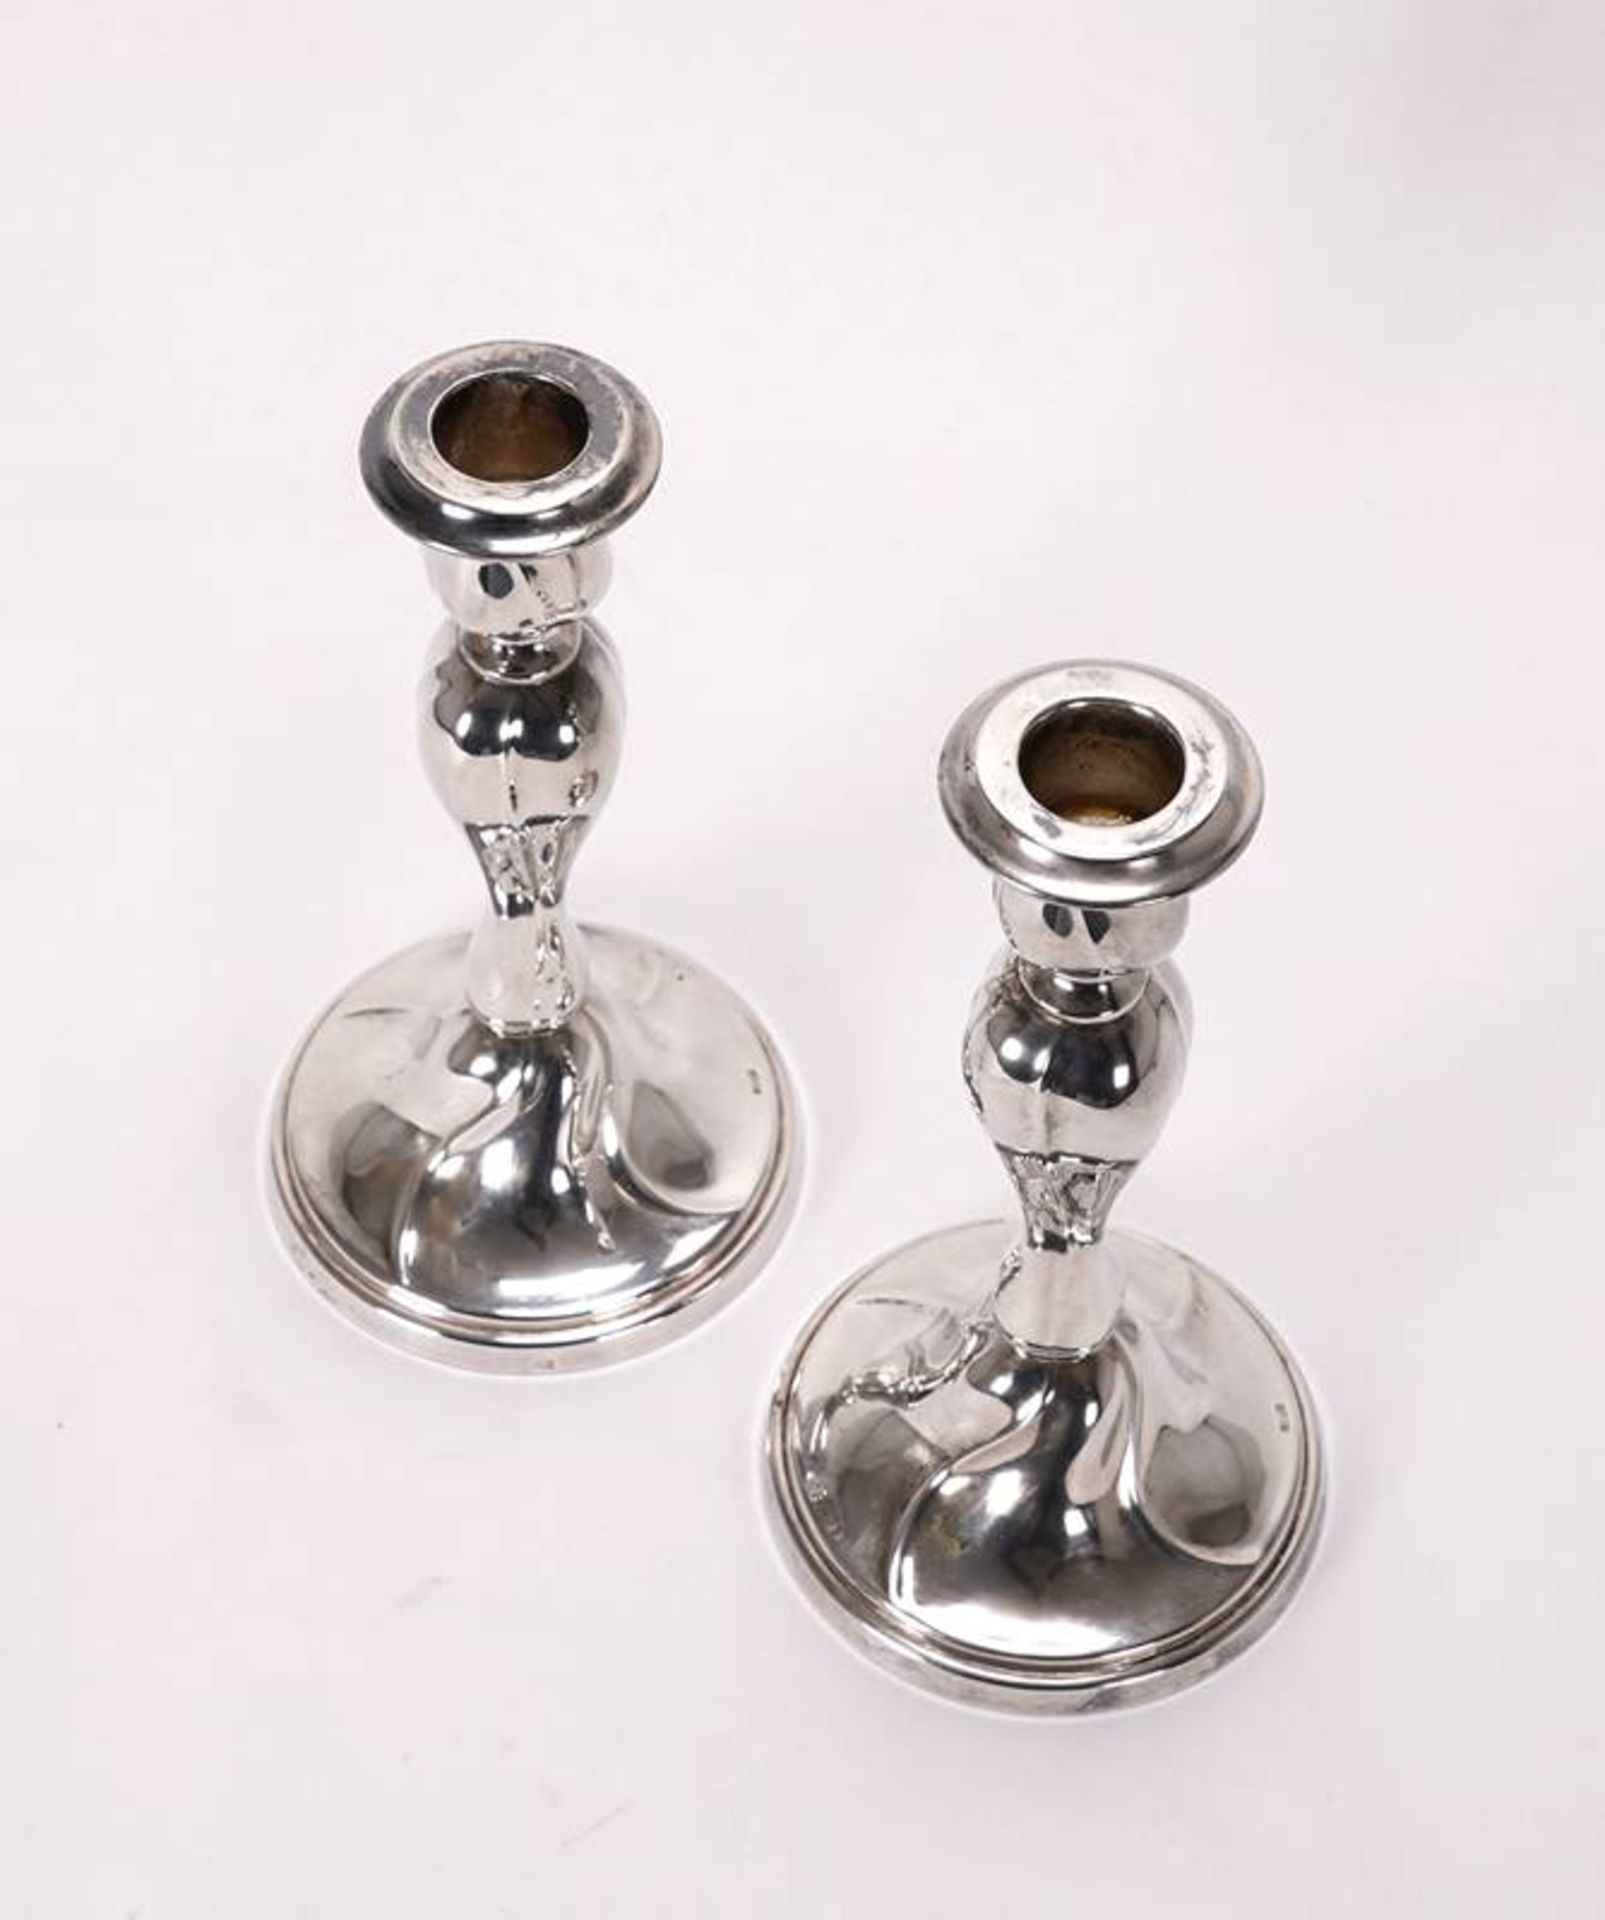 Pair of baroque candlesticks - Image 2 of 4